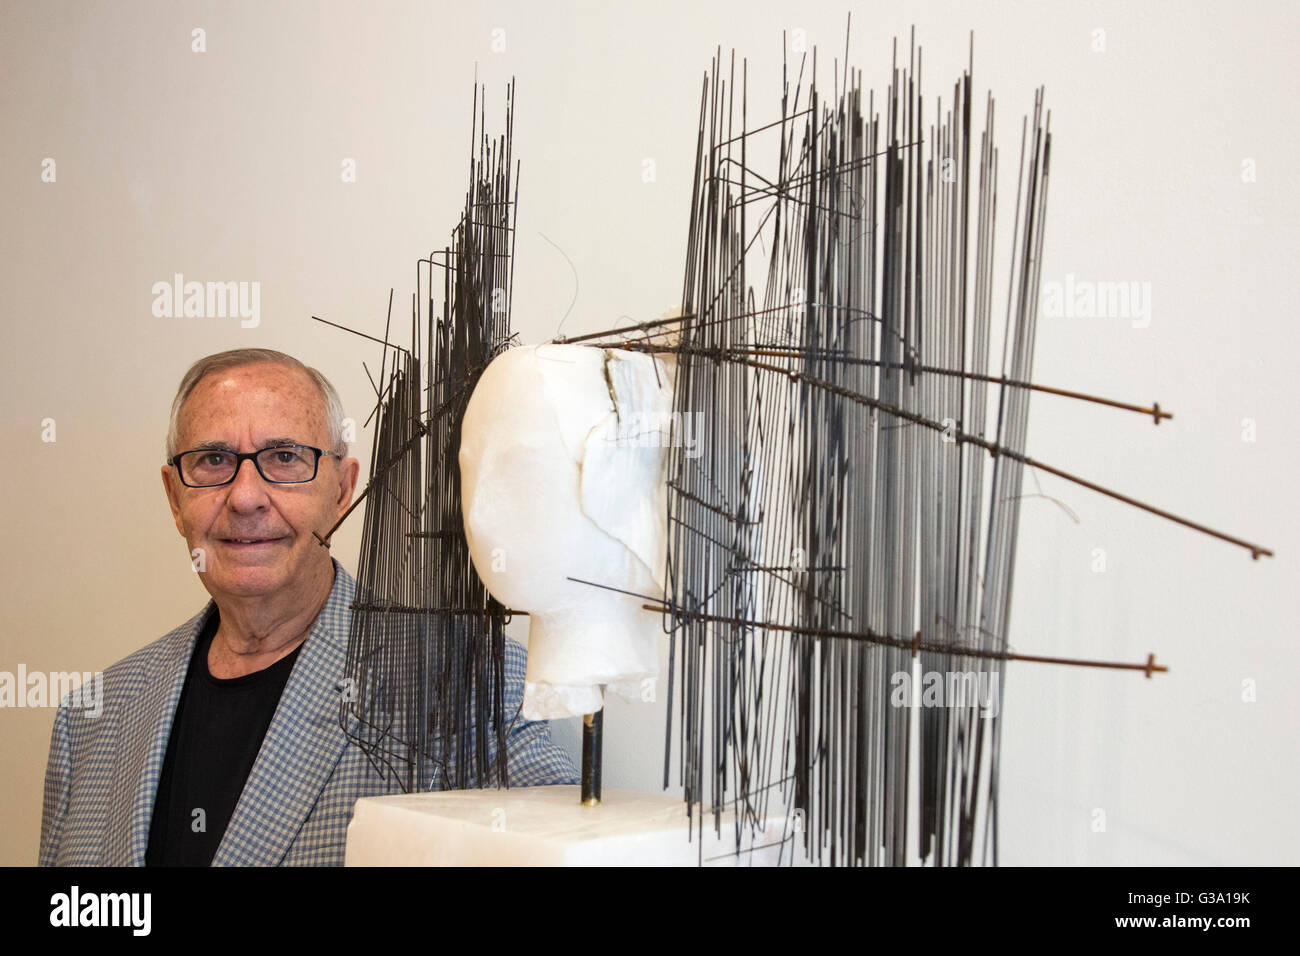 London, UK. 9 June 2016. Pictured: Spanish artist Manolo Valdes at the exhibition with this sculpture Vibraciones, 2016. Marlborough Fine Art present the exhibition Manolo Valdes: Recent Work, Paintings & Sculptures from 10 June to 16 July 2016. Stock Photo